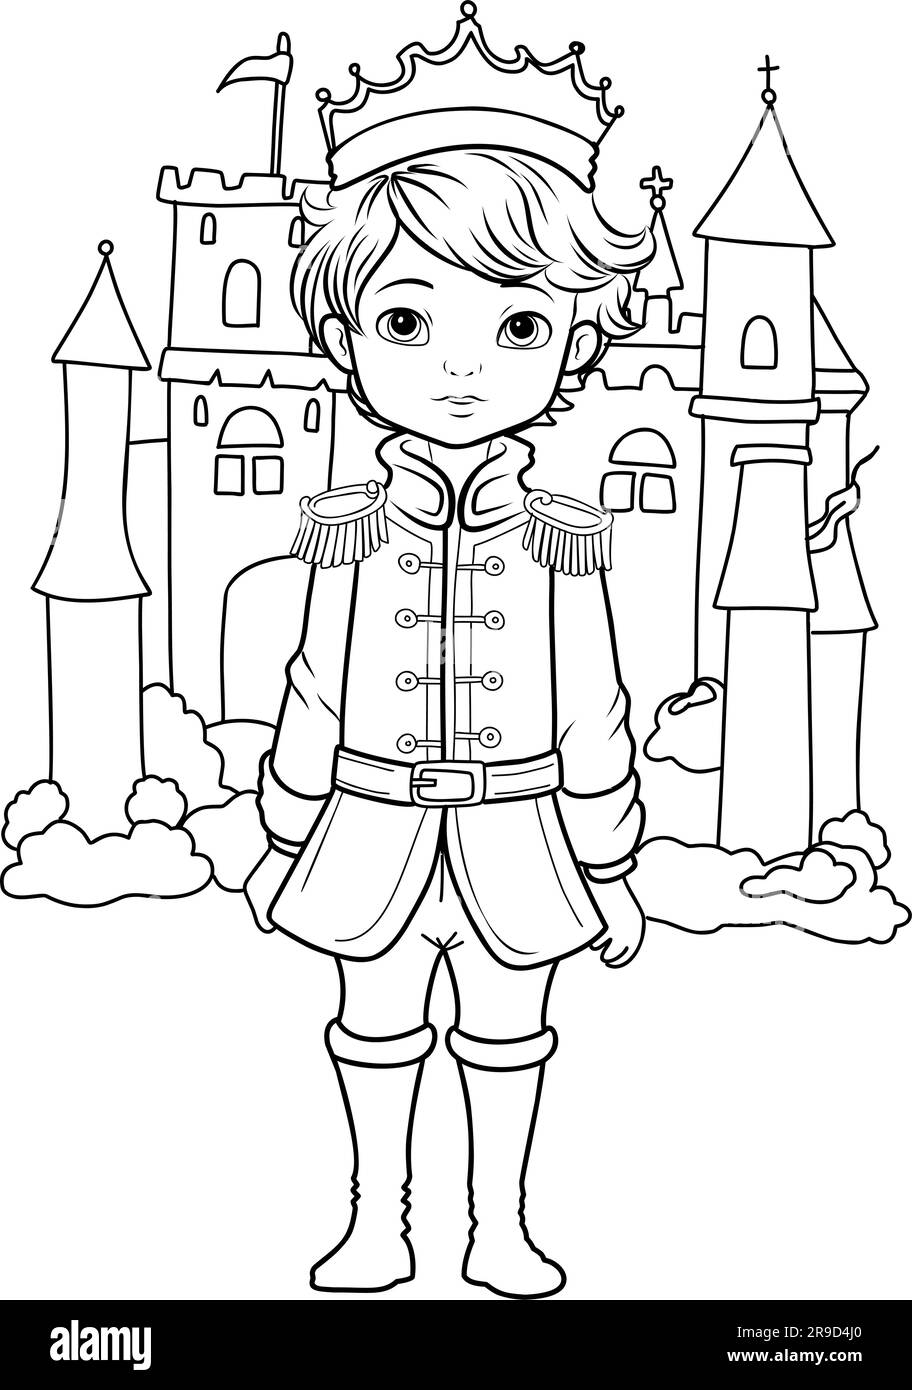 Prince coloring page. Coloring page prince in a crown and royal clothes ...